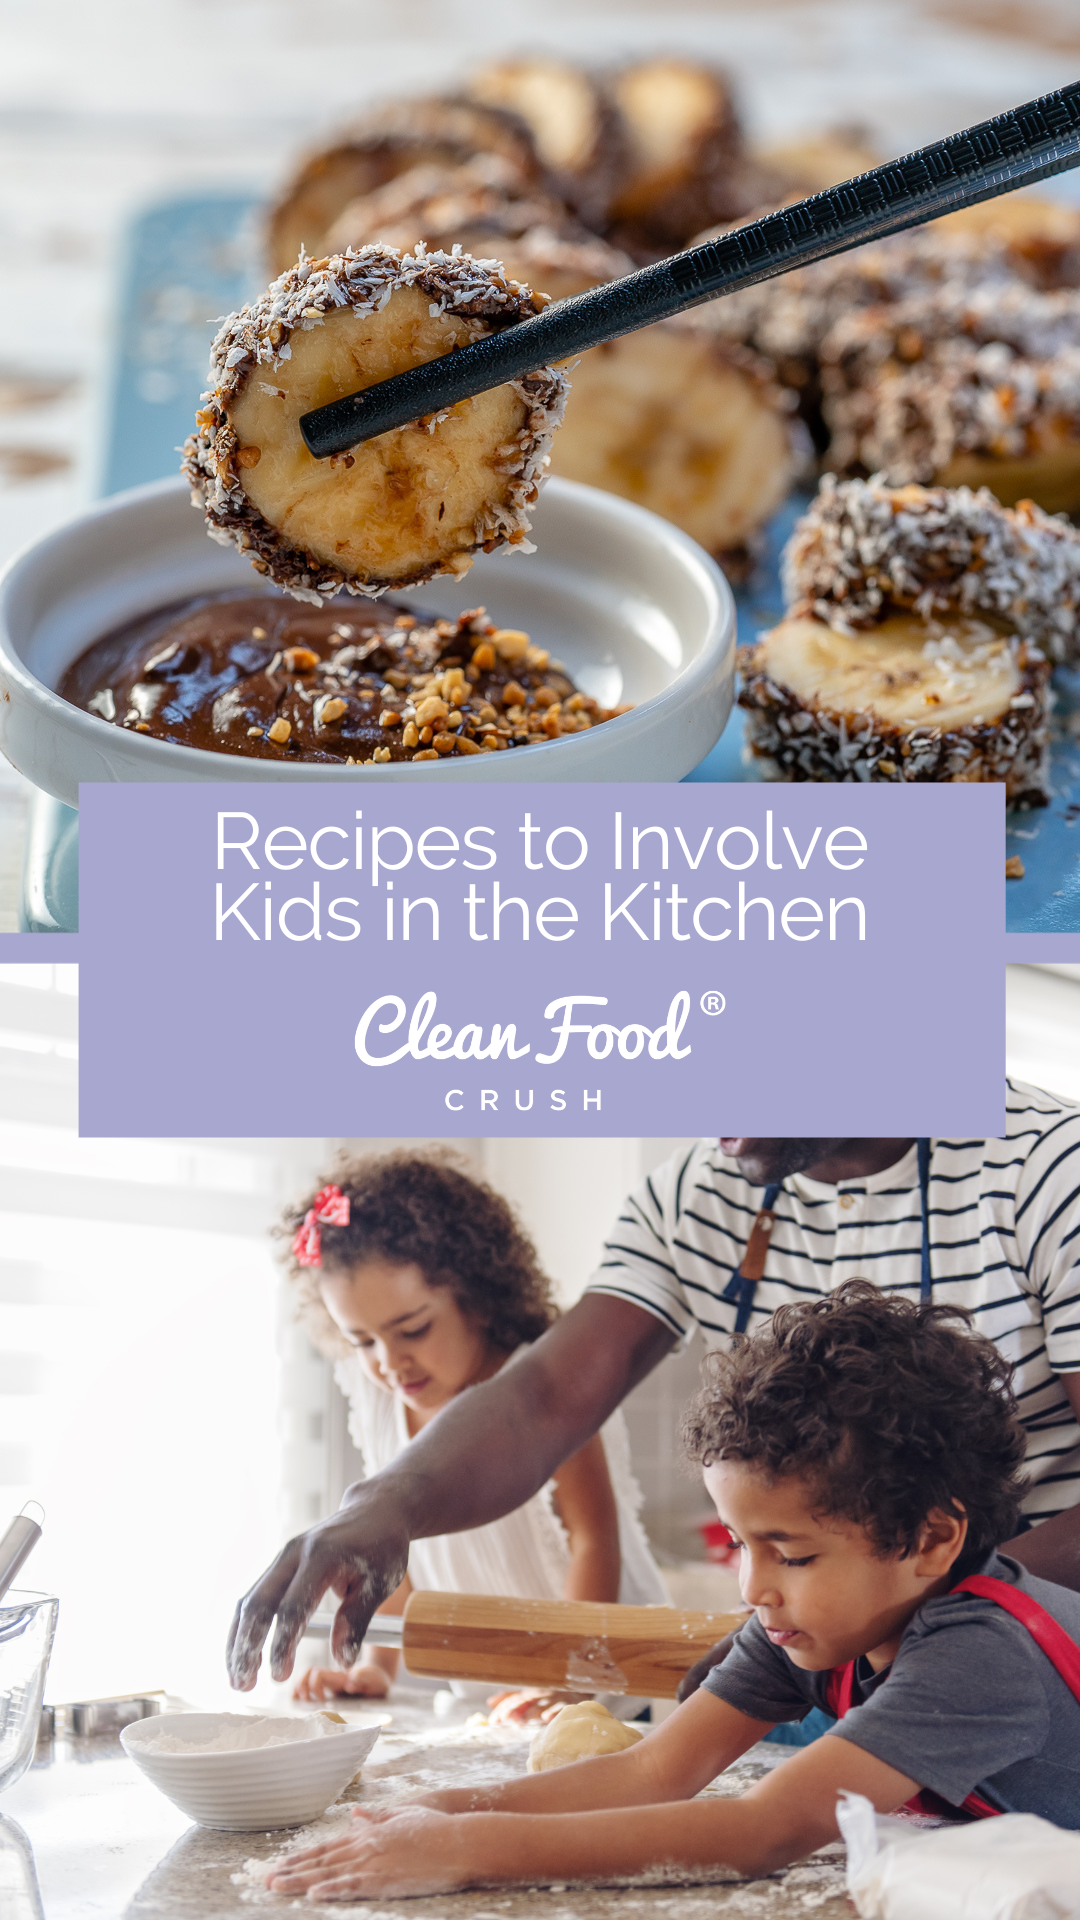 Kids' cooking recipes